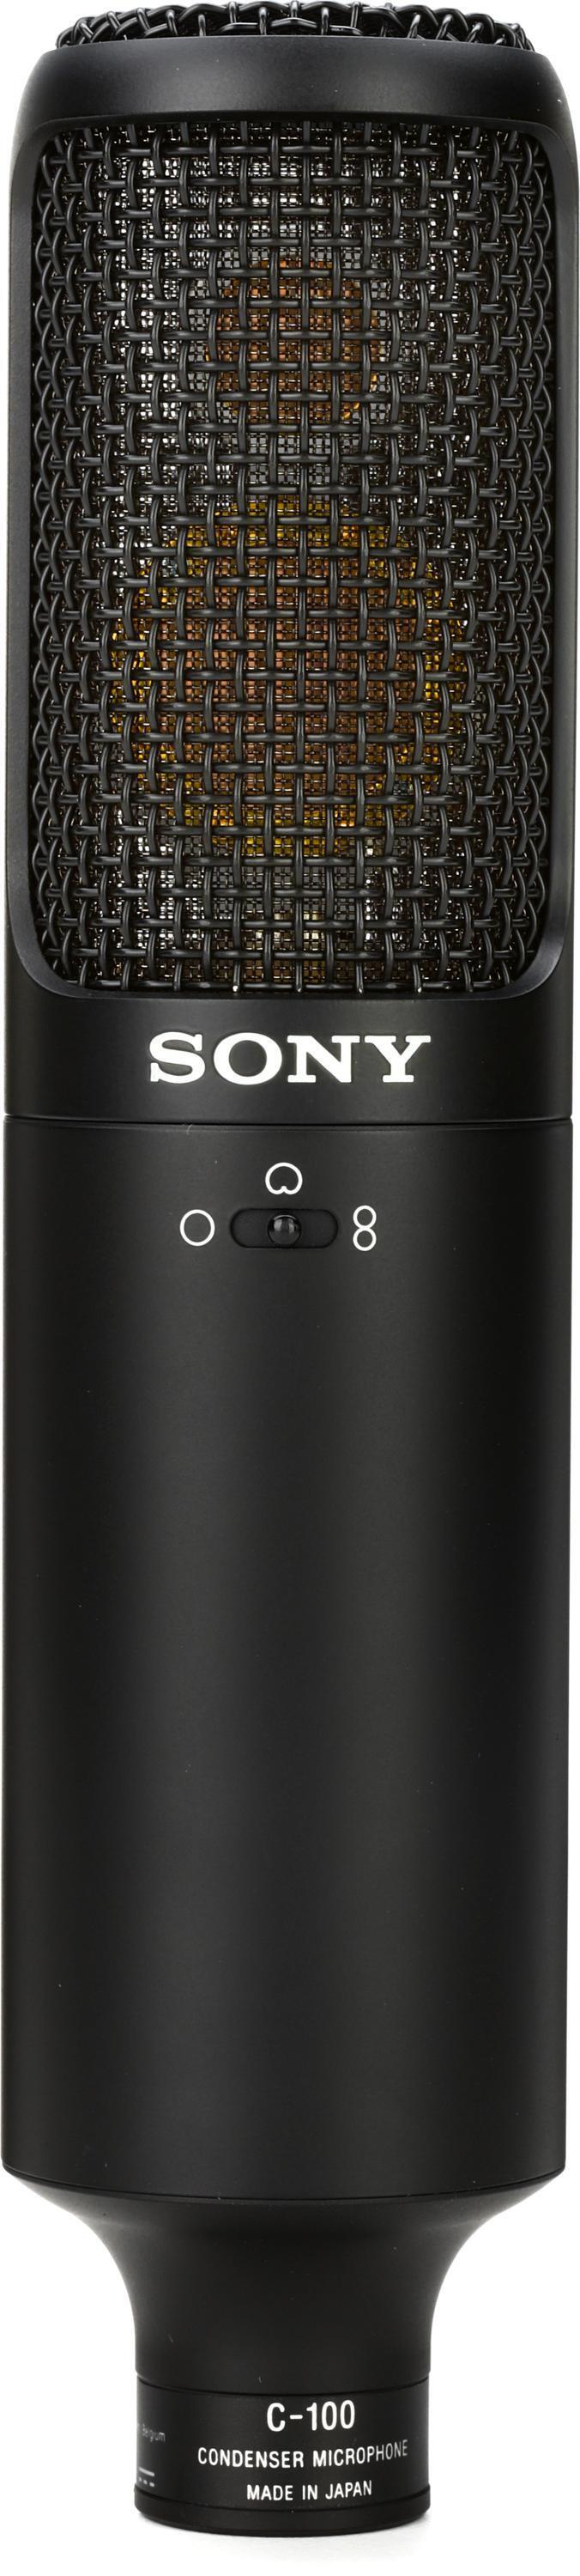 Sony C-100 Two-way Condenser Microphone | Sweetwater